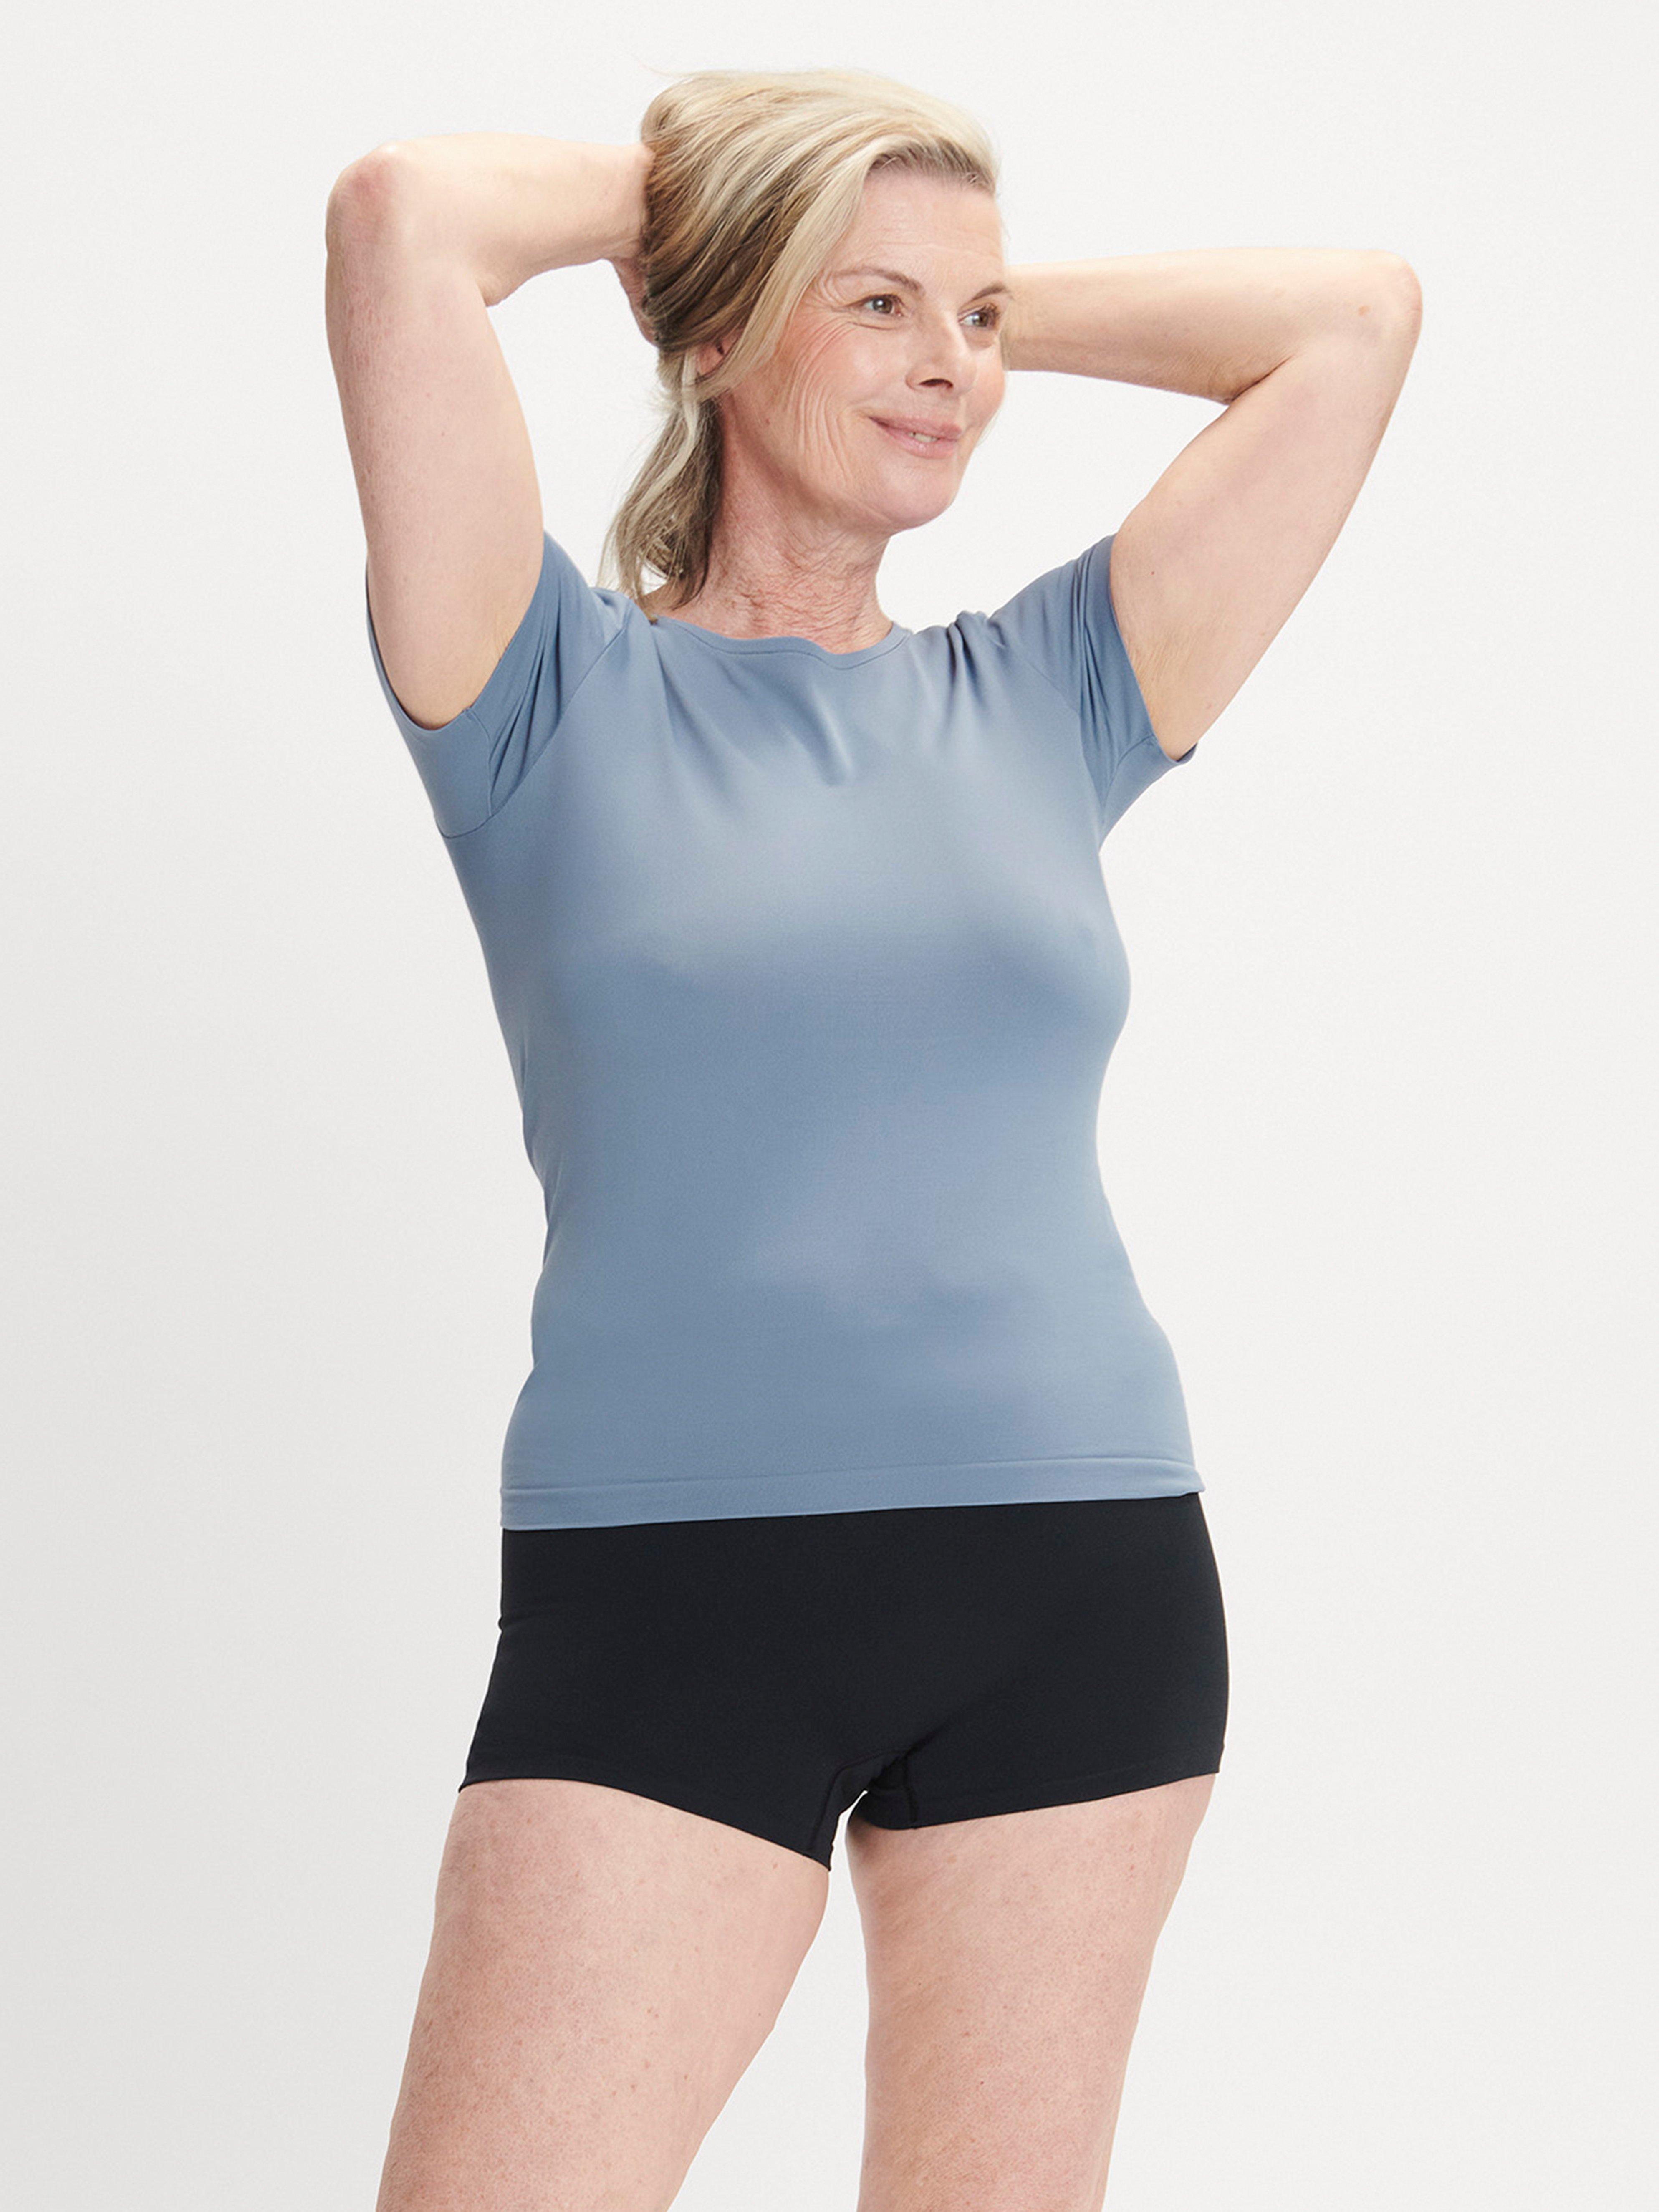 Lindex's brand Female Engineering® launches menopause clothing